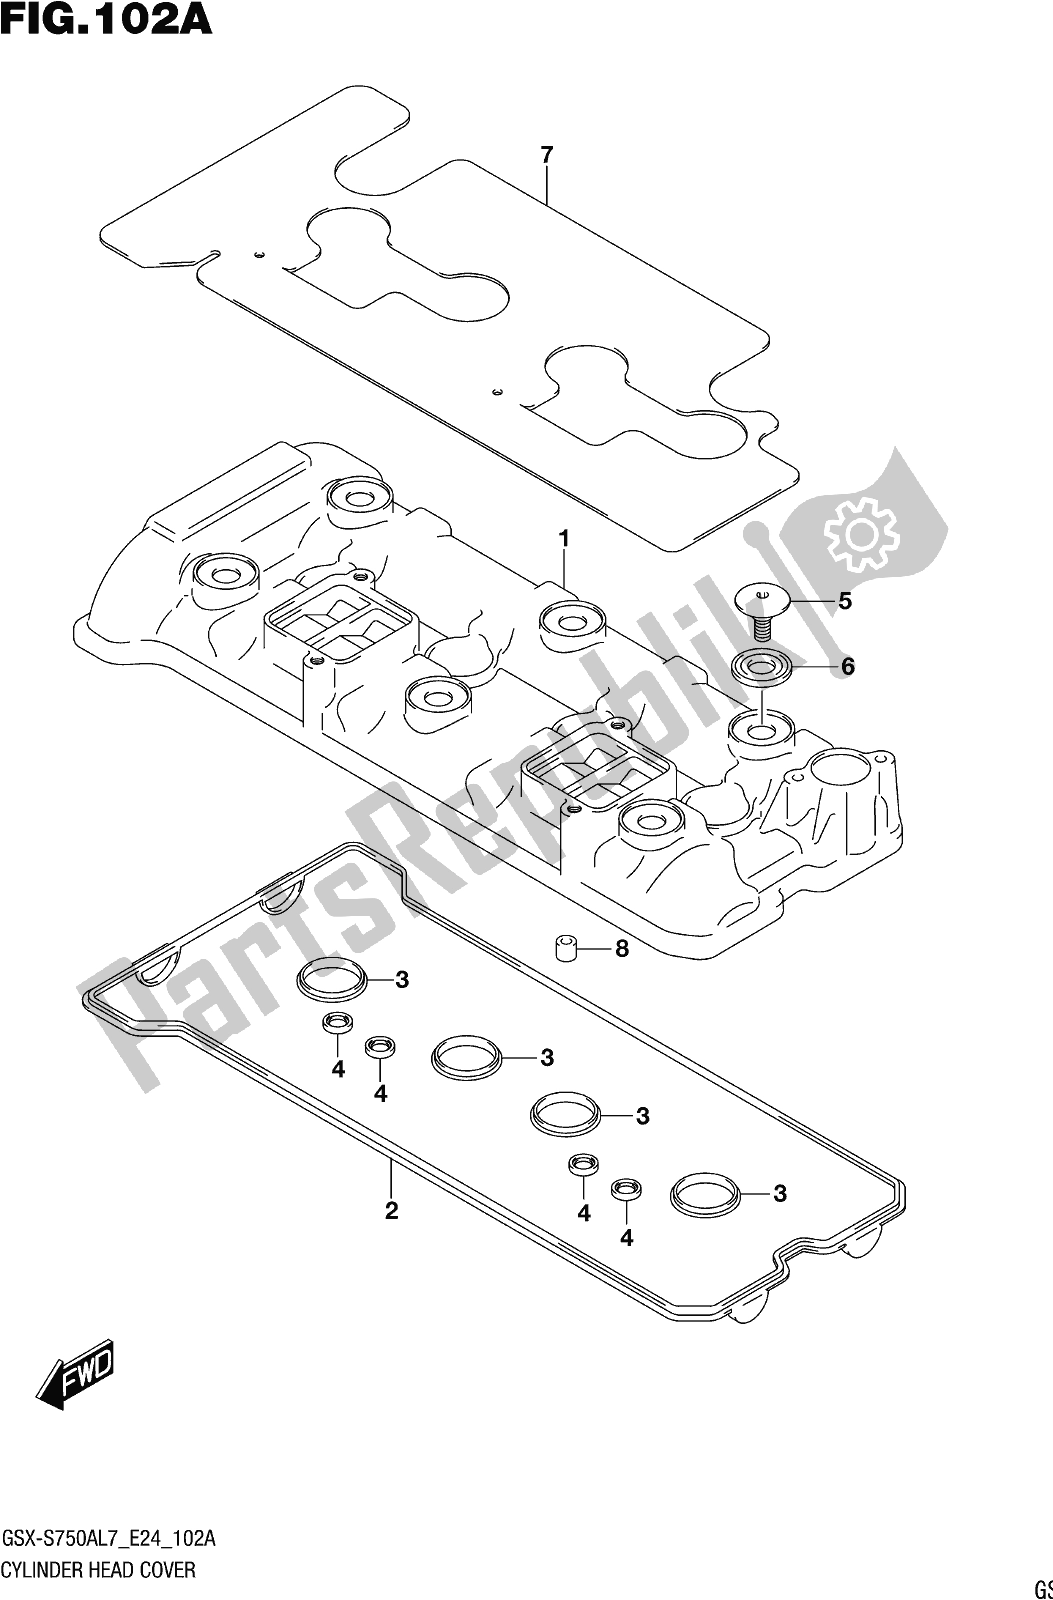 All parts for the Fig. 102a Cylinder Head Cover of the Suzuki Gsx-s 750 AZ 2017